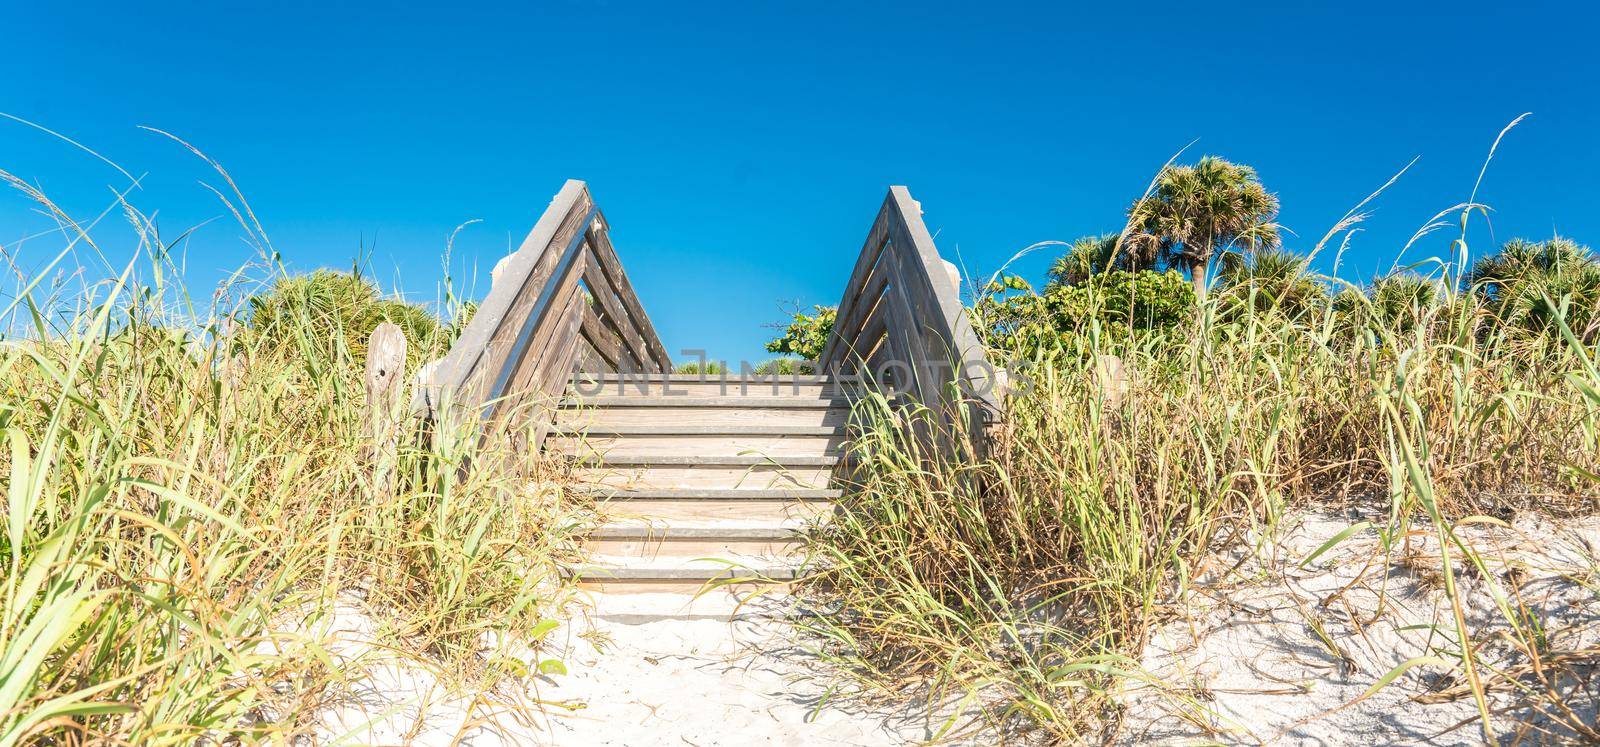 Wooden stairs over sand dune and grass at the beach in Florida USA by Mariakray